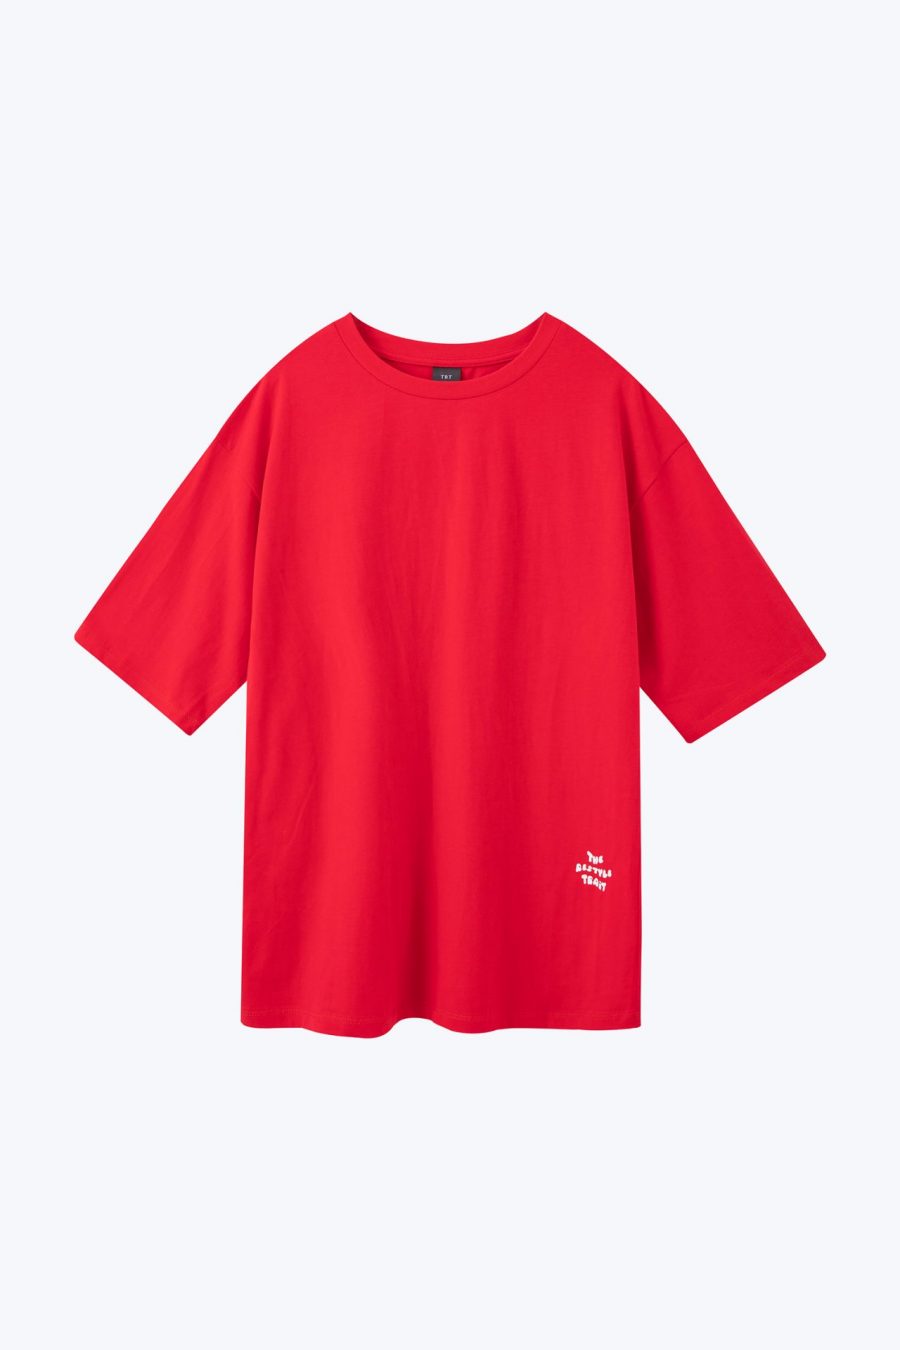 MT900234D The Restyle Trait Puff Print Logo Tee RED